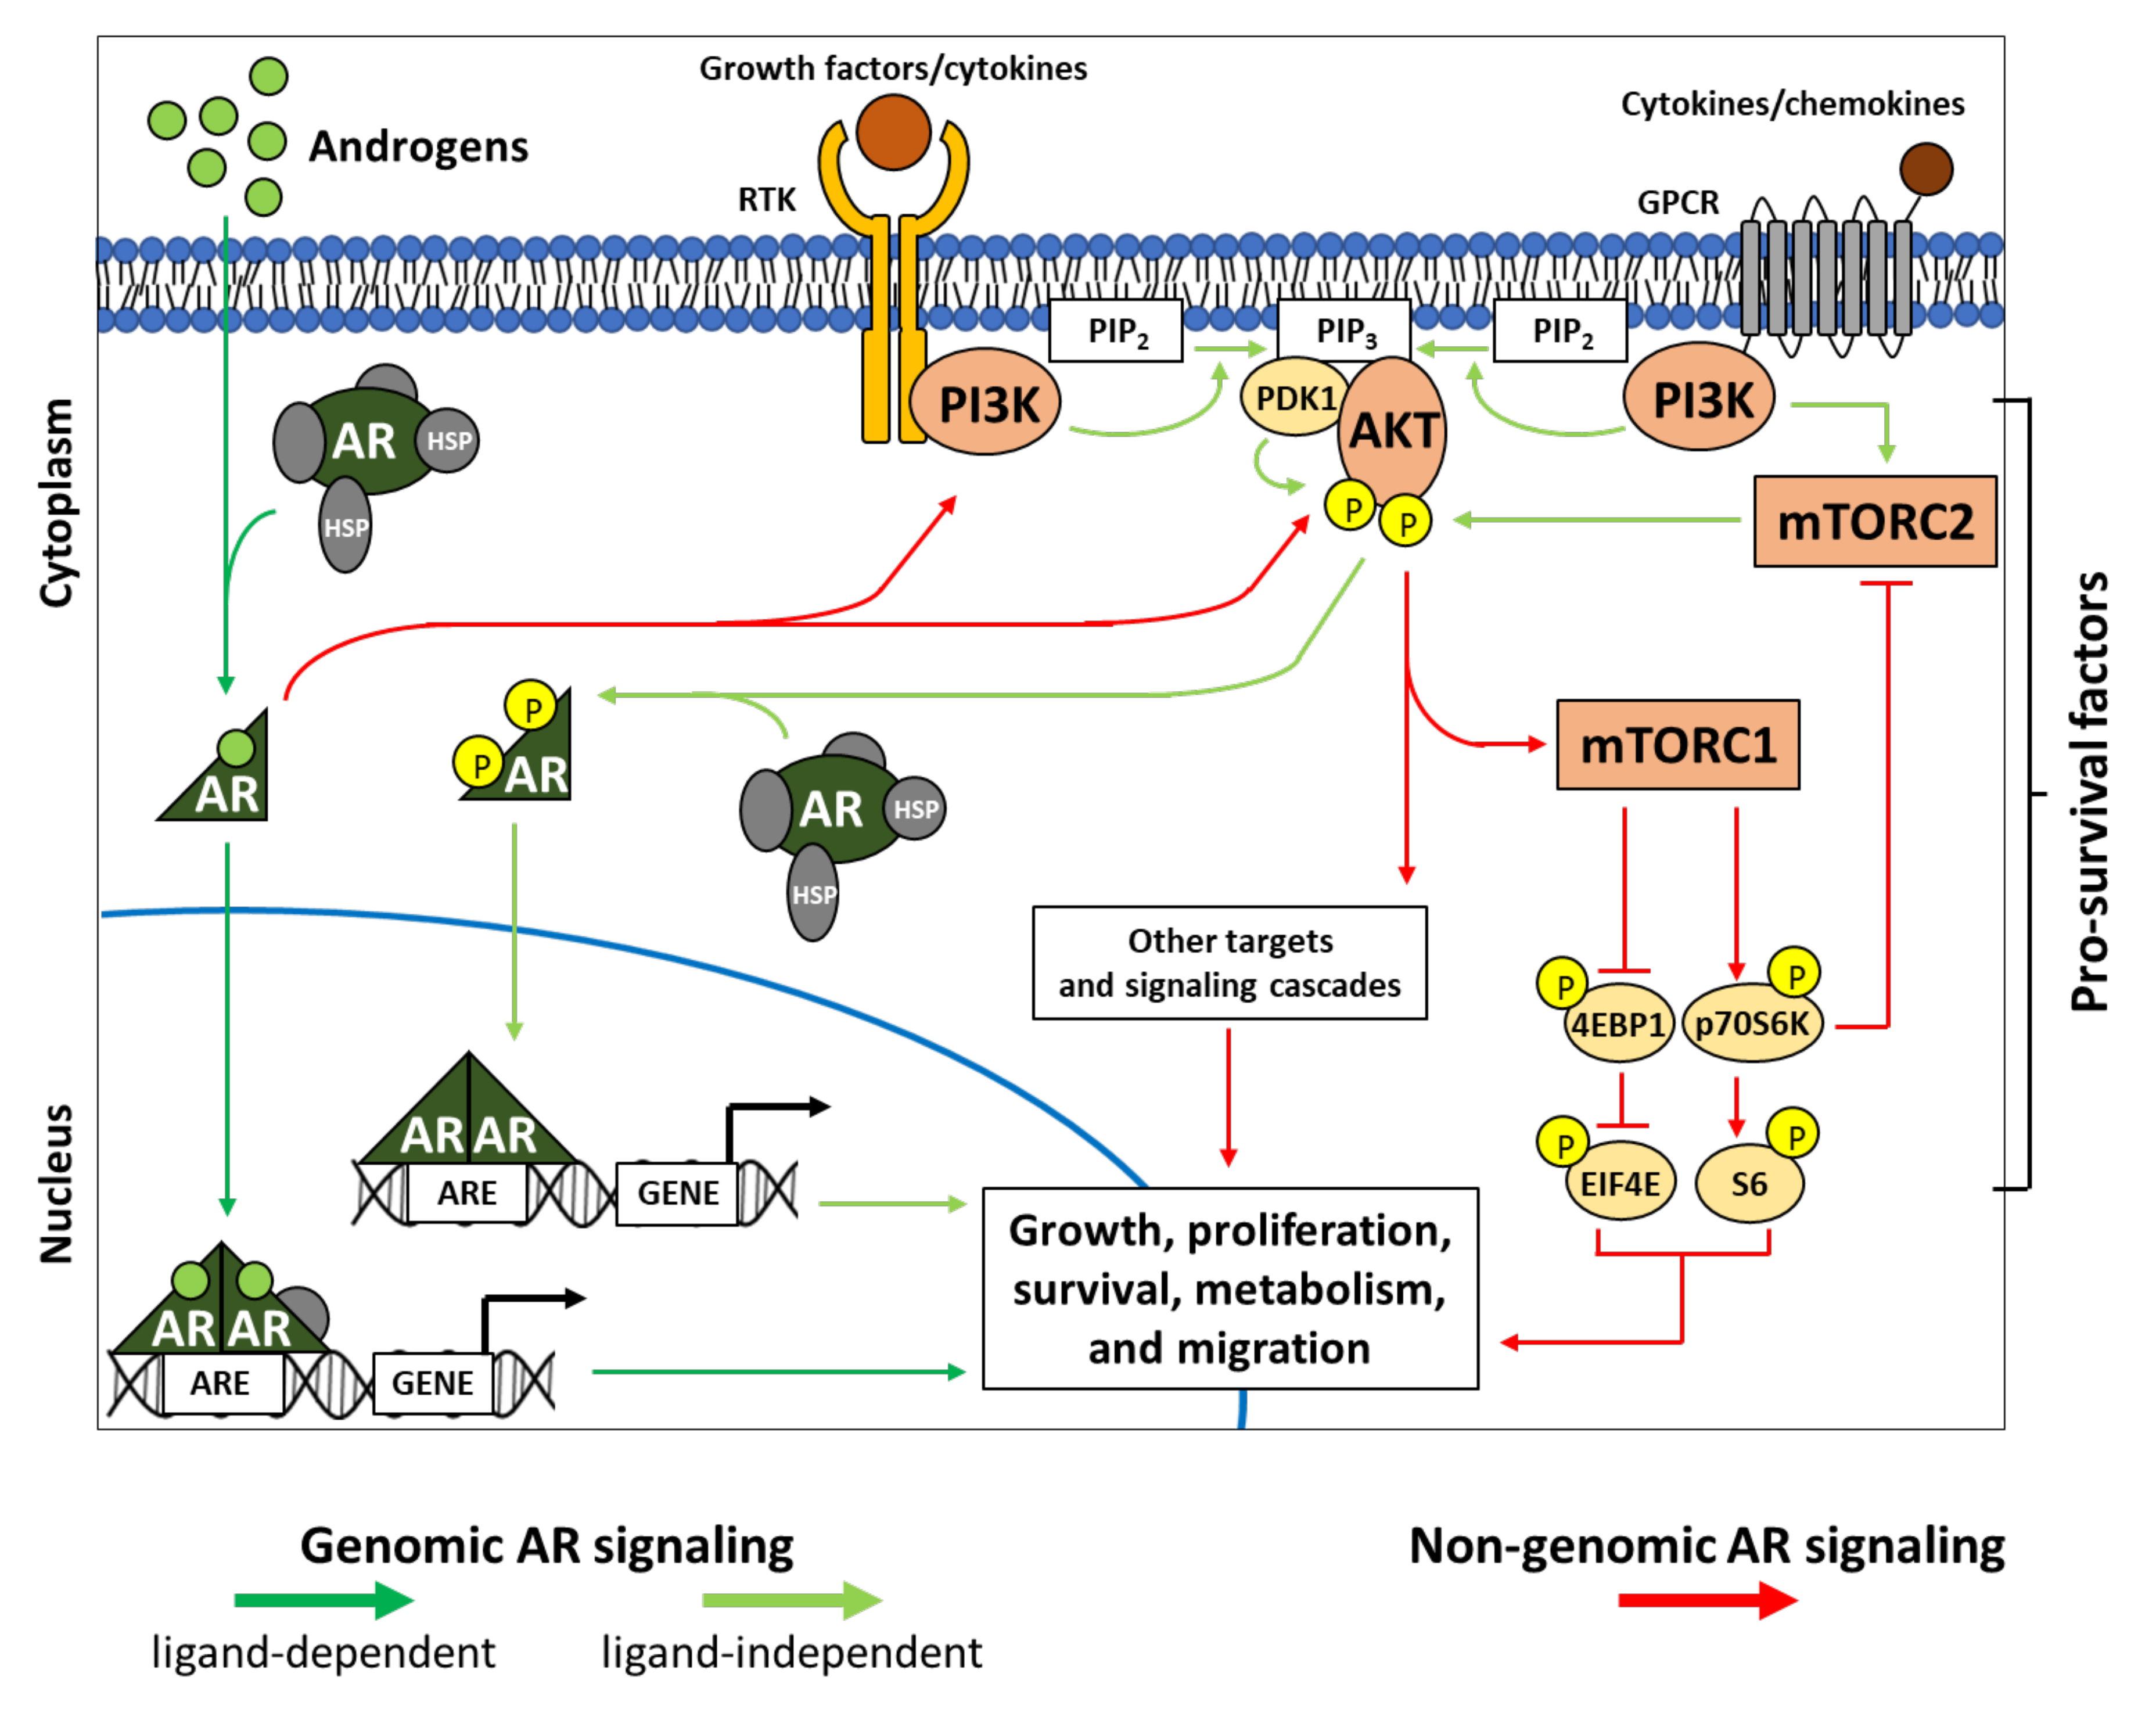 IJMS | Free Full-Text | Role of PI3K-AKT-mTOR Pathway as a Pro